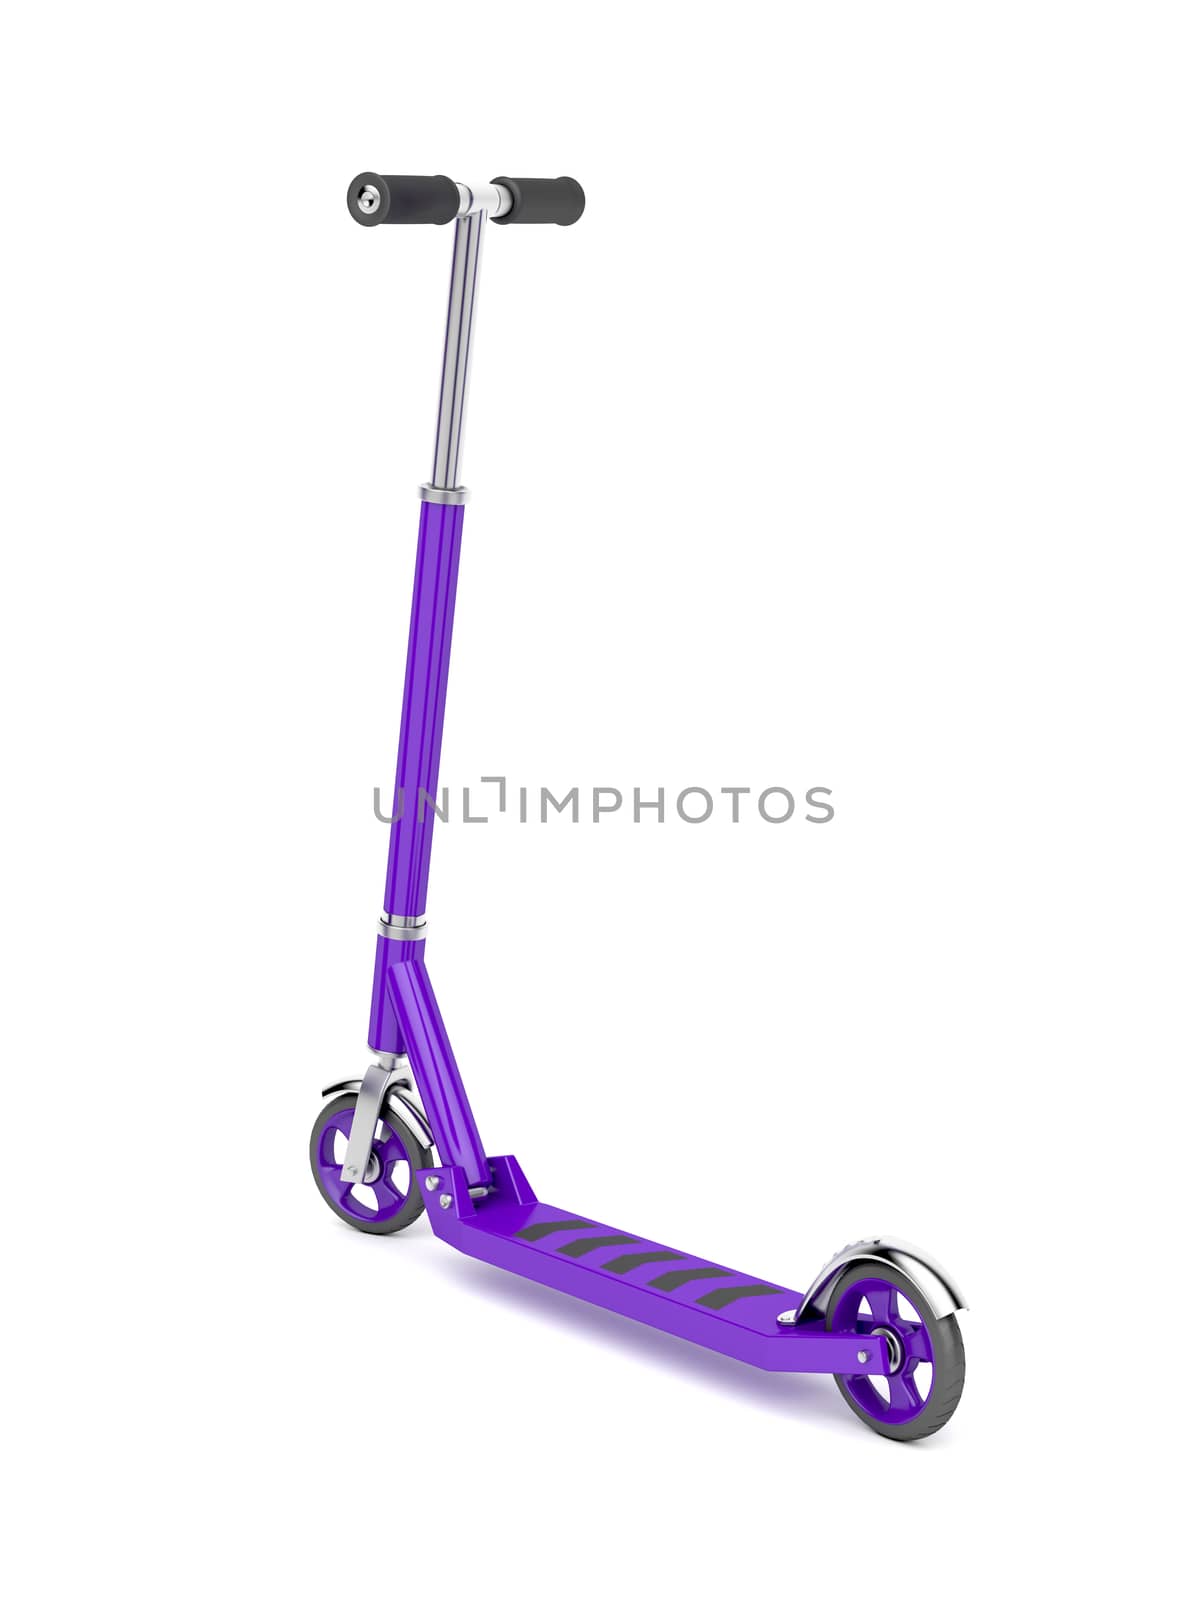 Purple push scooter by magraphics